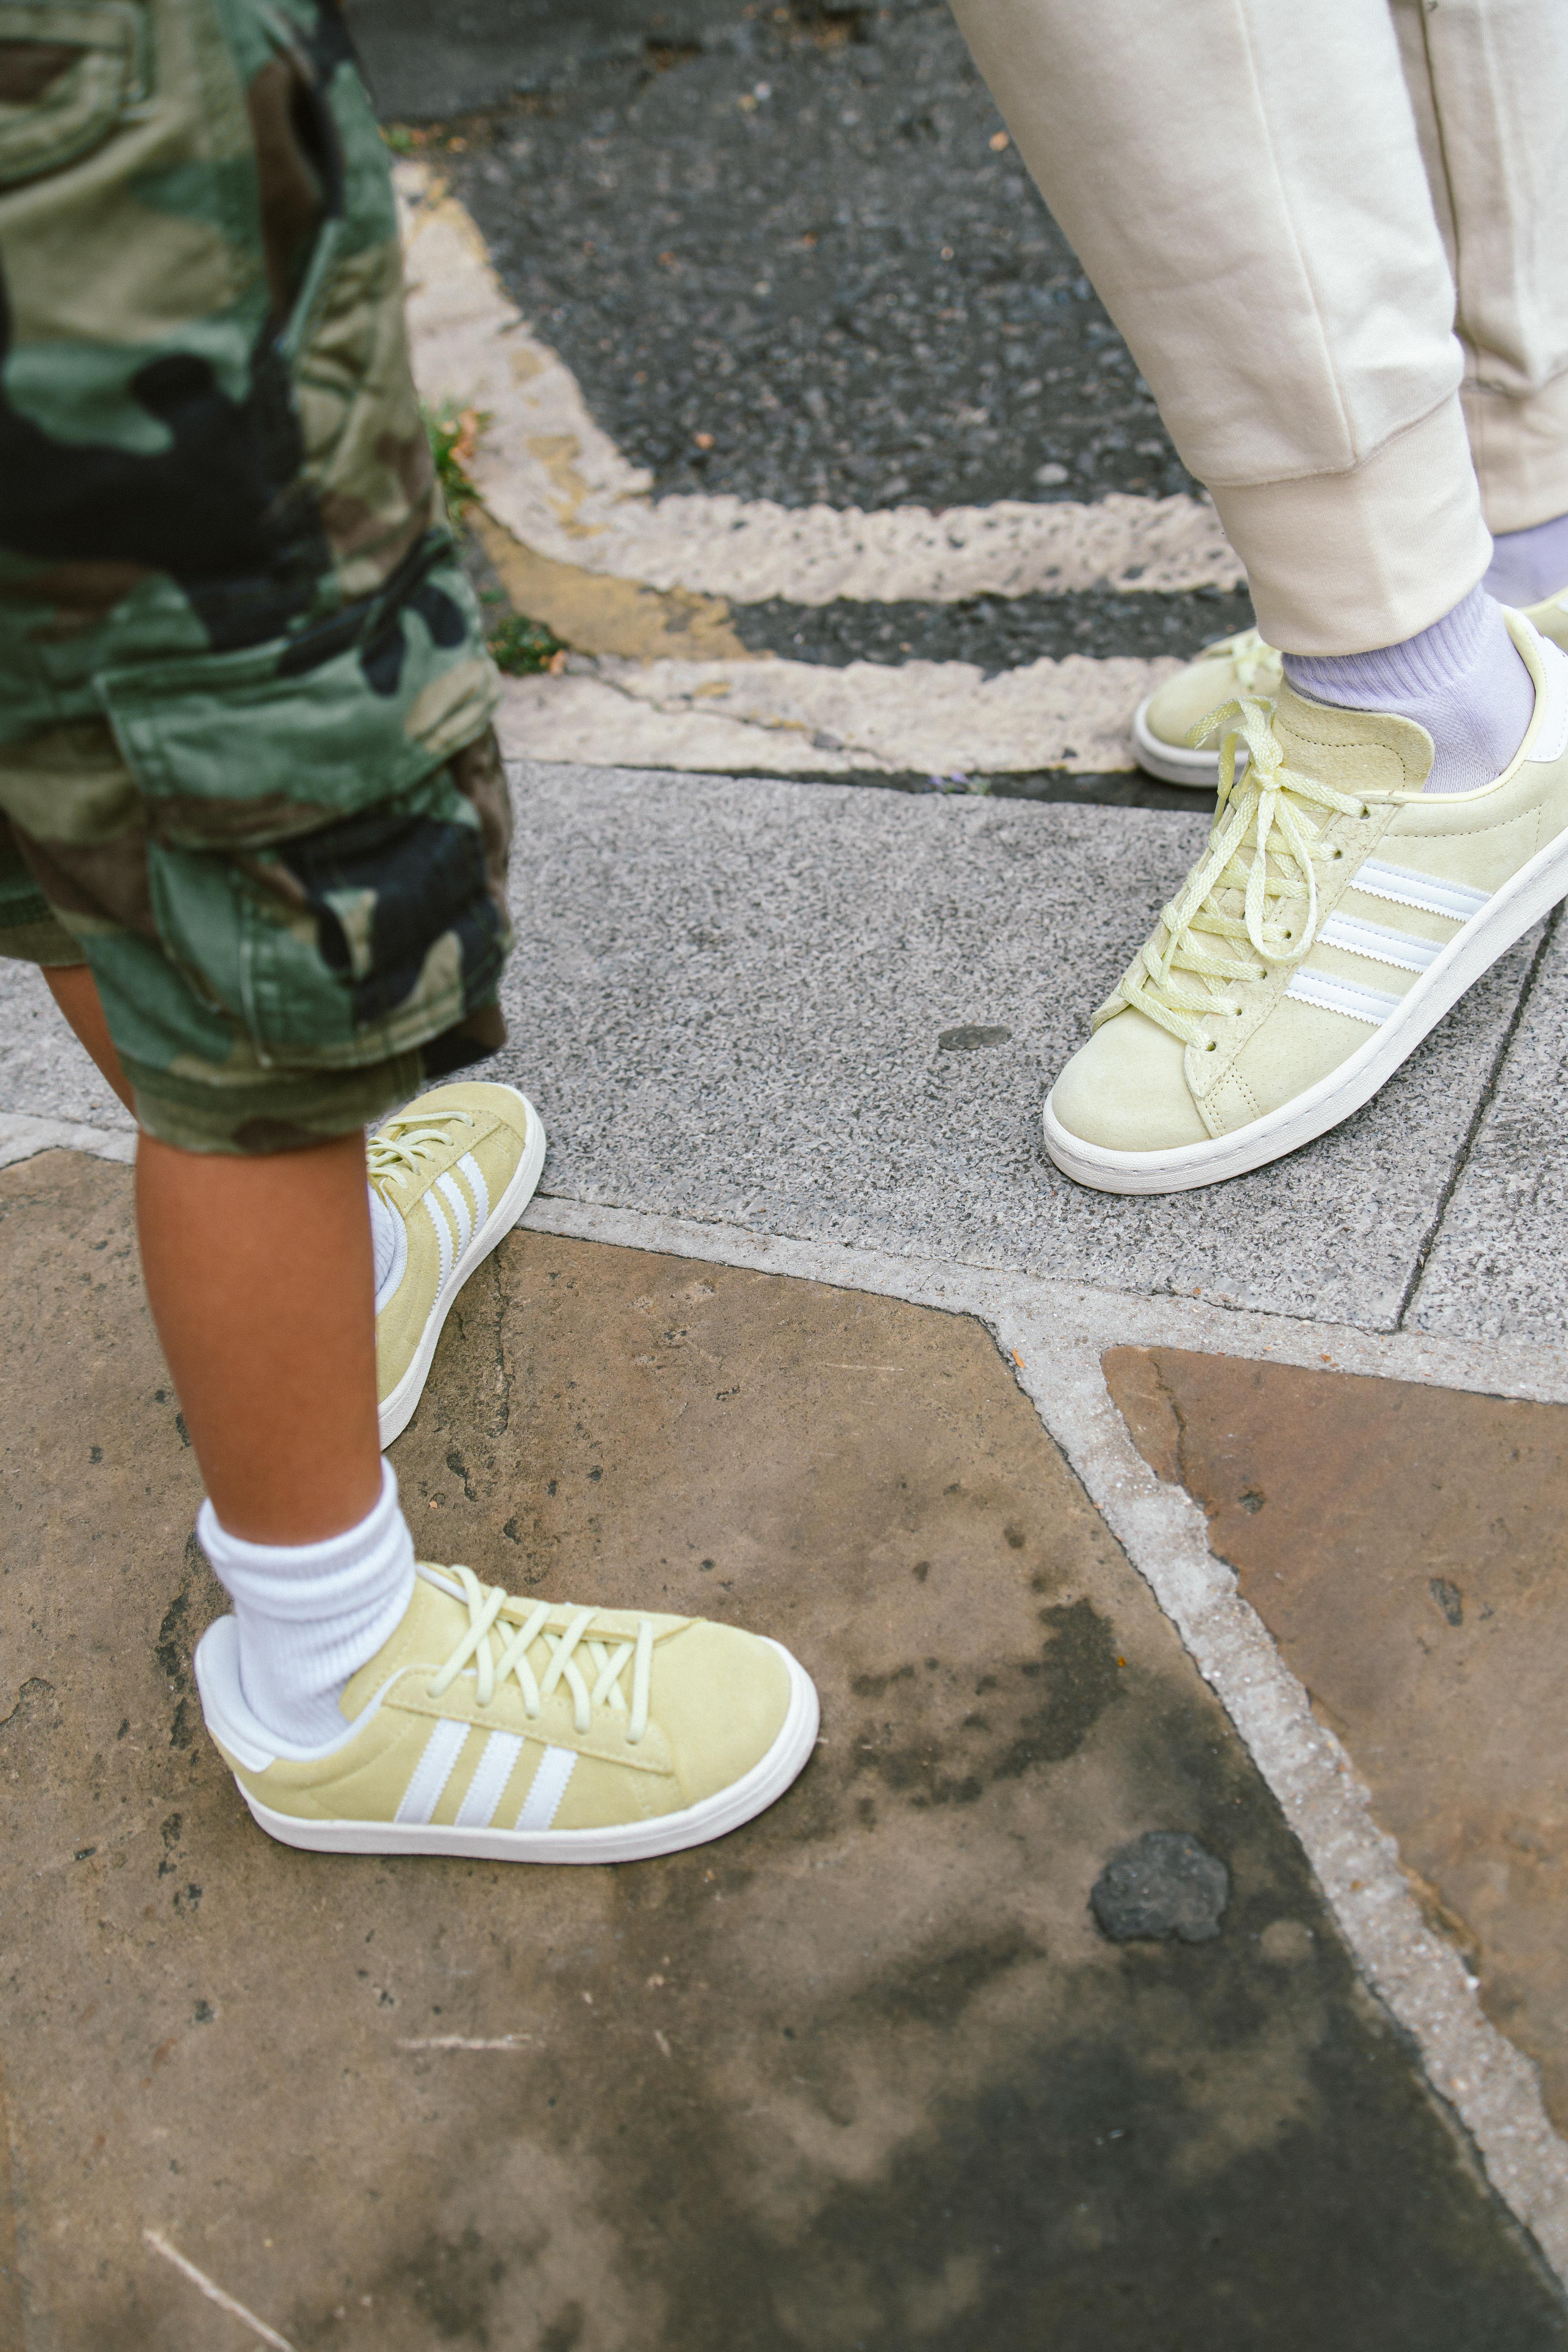 The adidas Campus makes its debut with 